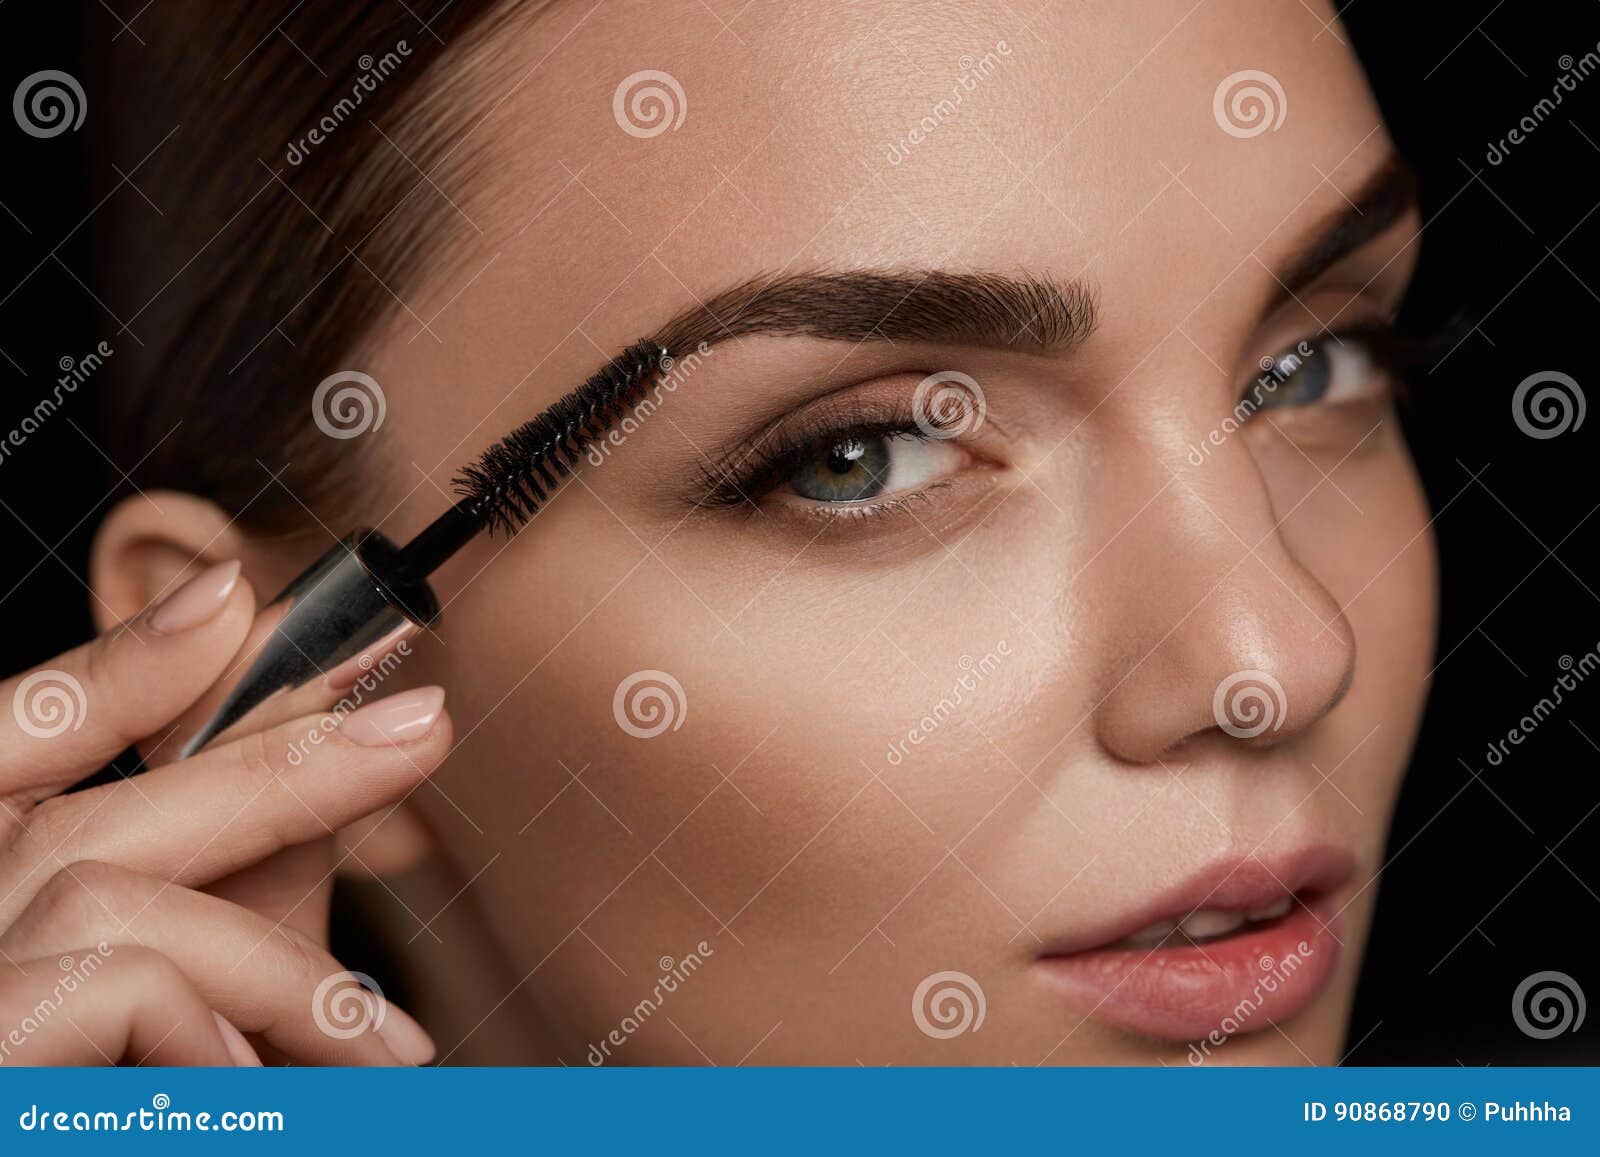 perfect makeup for beautiful woman. brow care for eyebrows